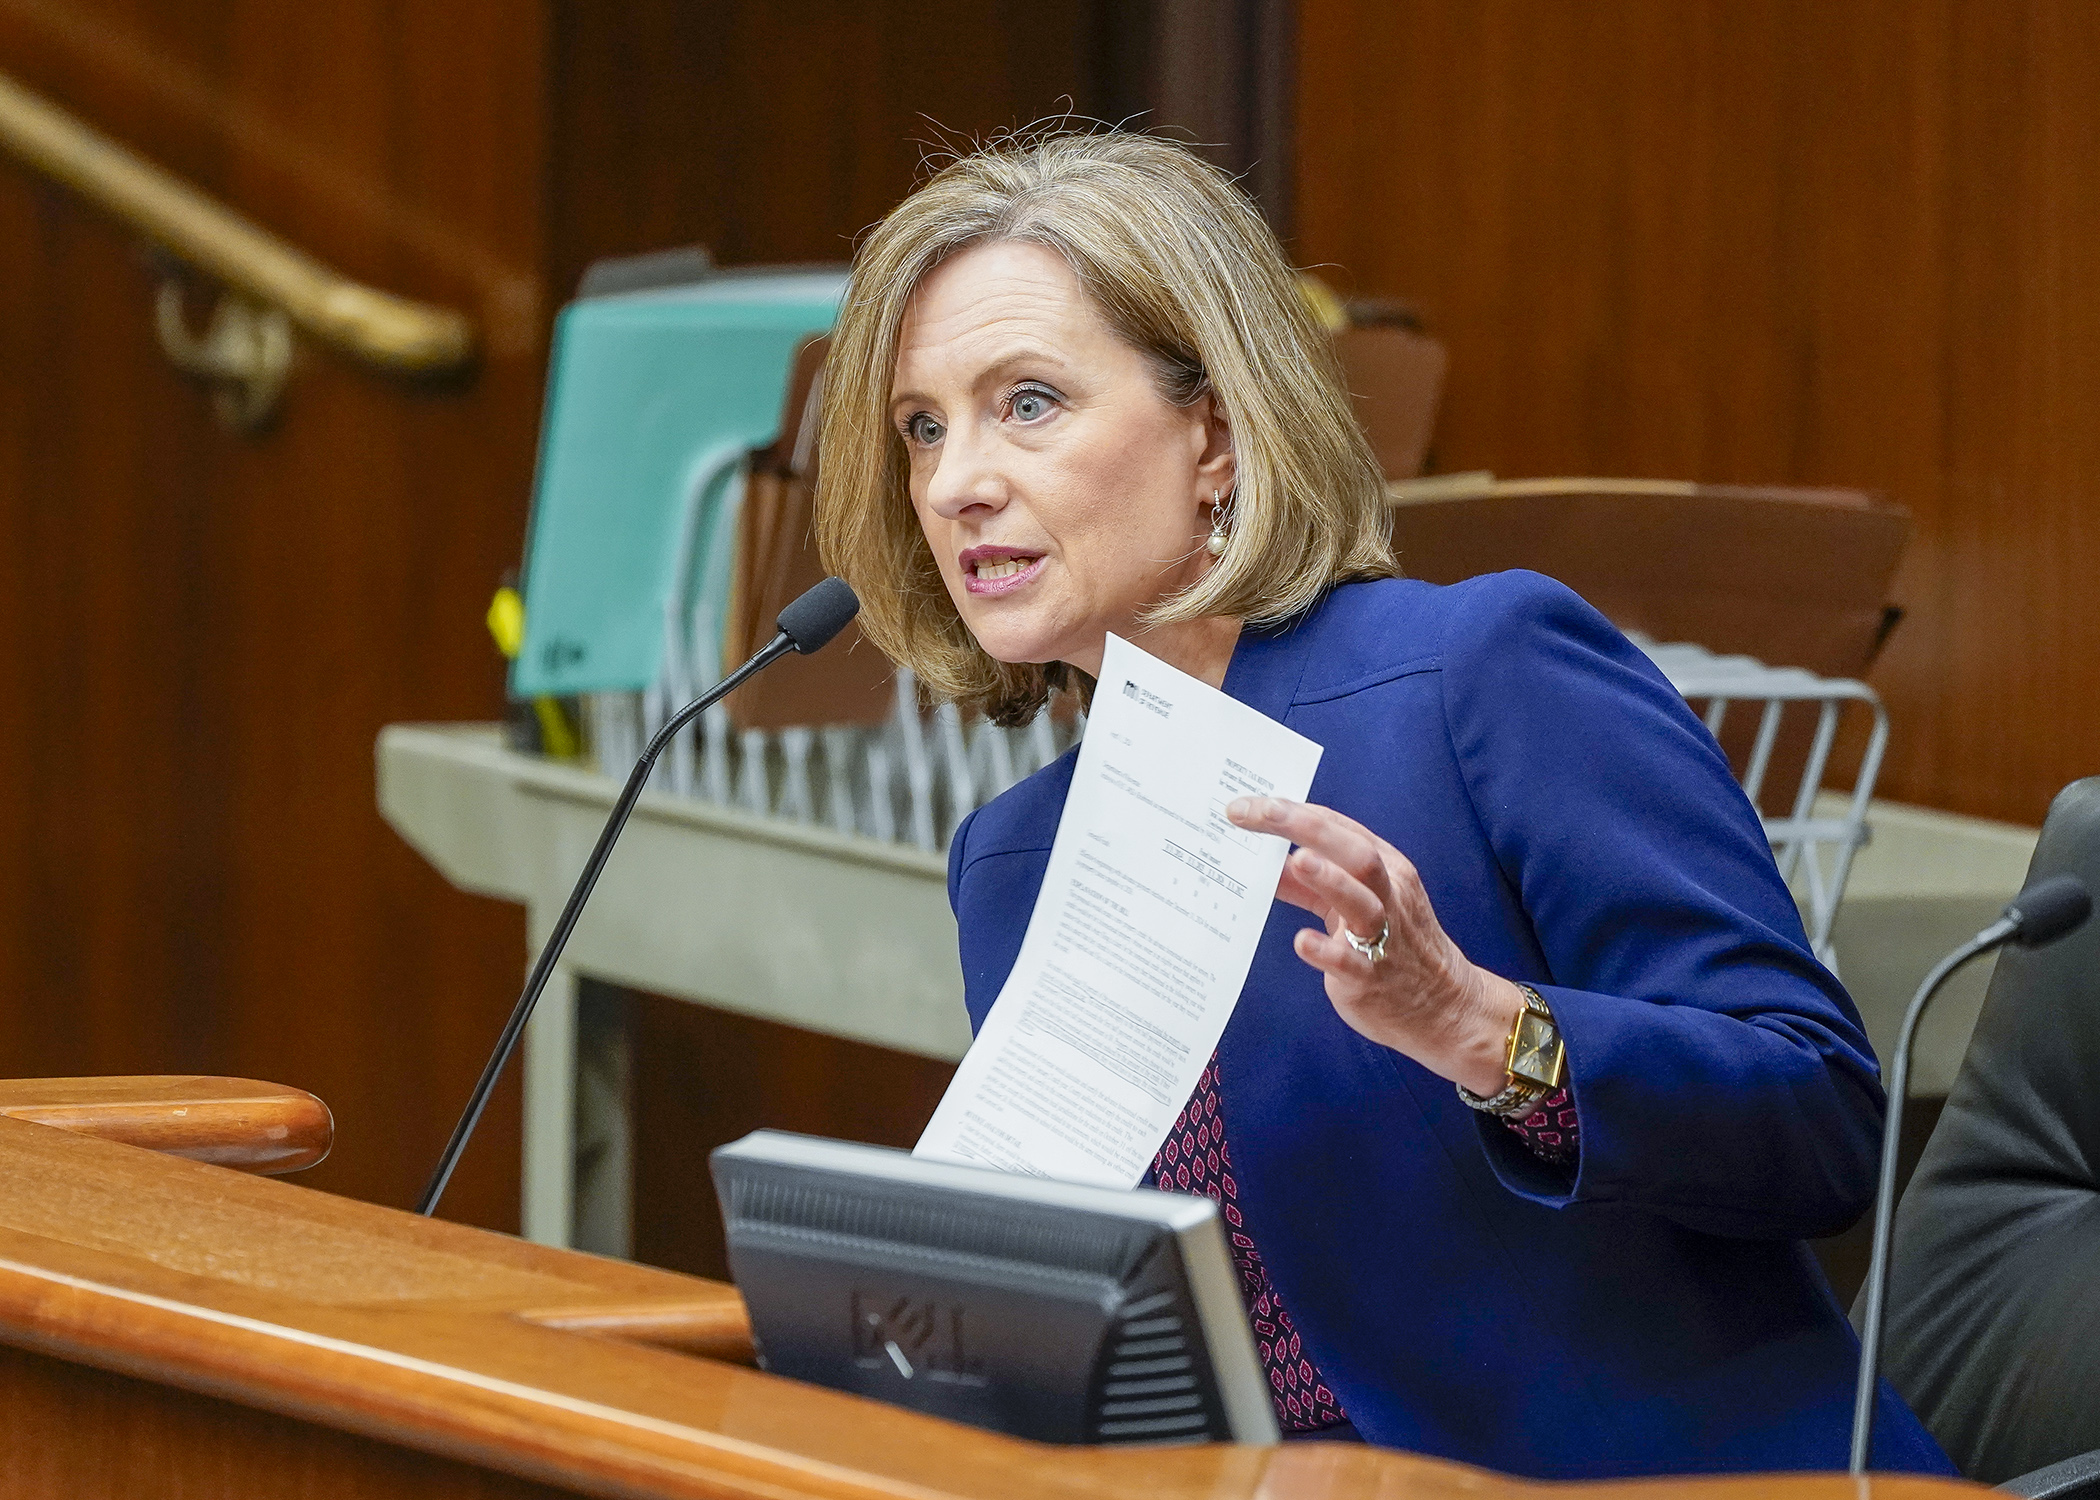 Rep. Kristin Robbins presents a bill she sponsors to the House Taxes Committee April 2. The proposal would provide a system through which seniors may elect to receive an advance payment of 50% of their homestead credit refund. (Photo by Andrew VonBank)